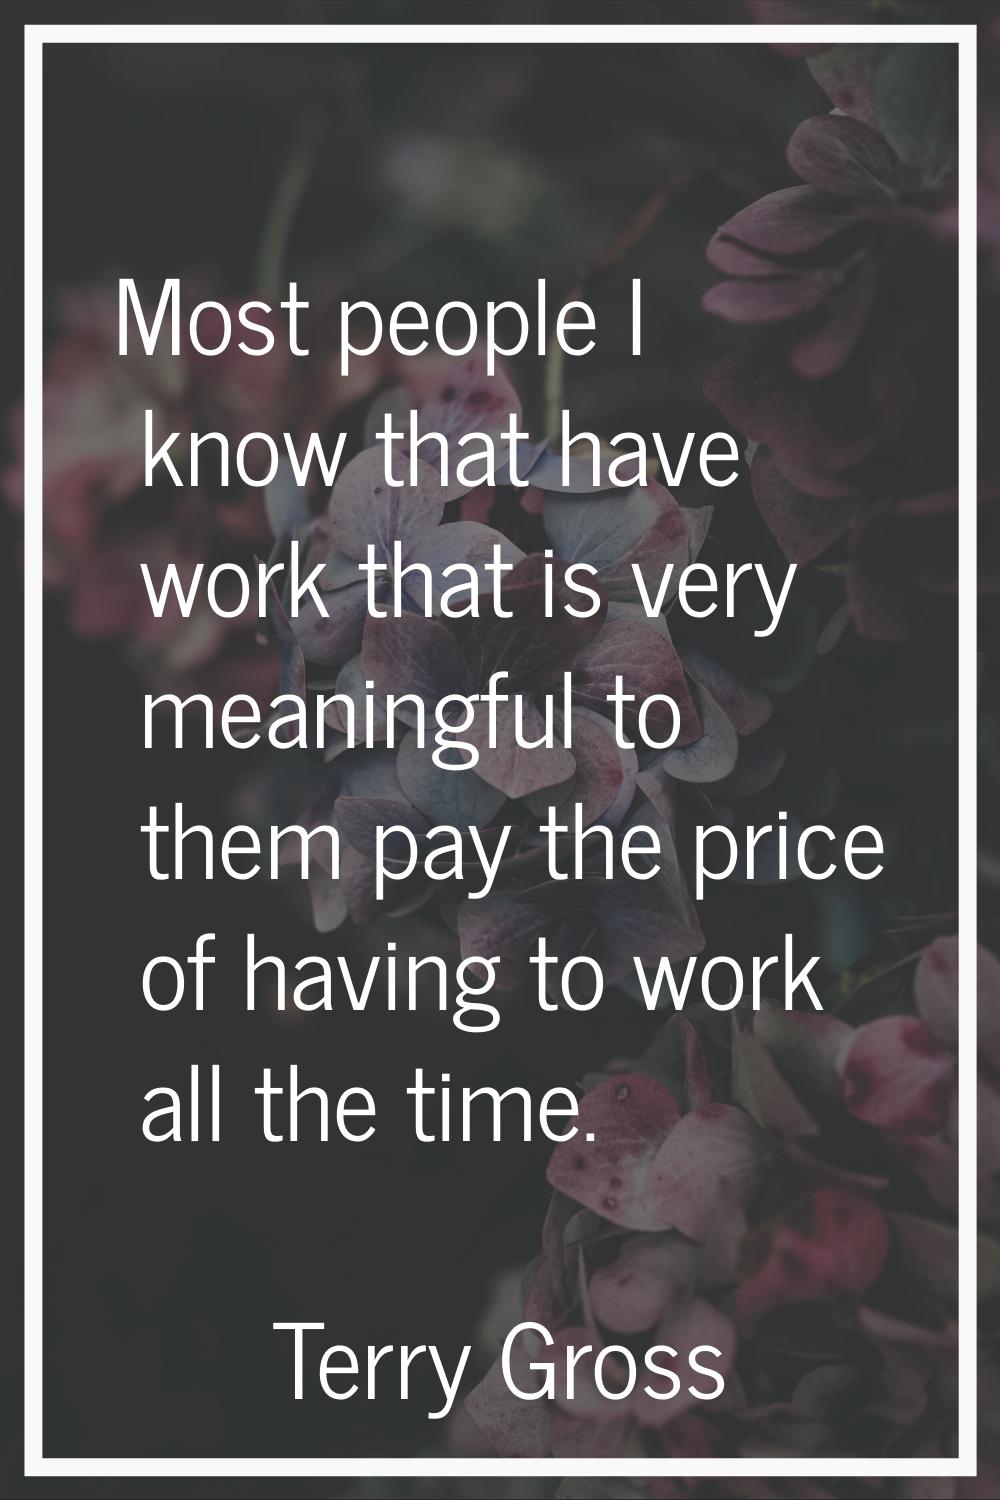 Most people I know that have work that is very meaningful to them pay the price of having to work a